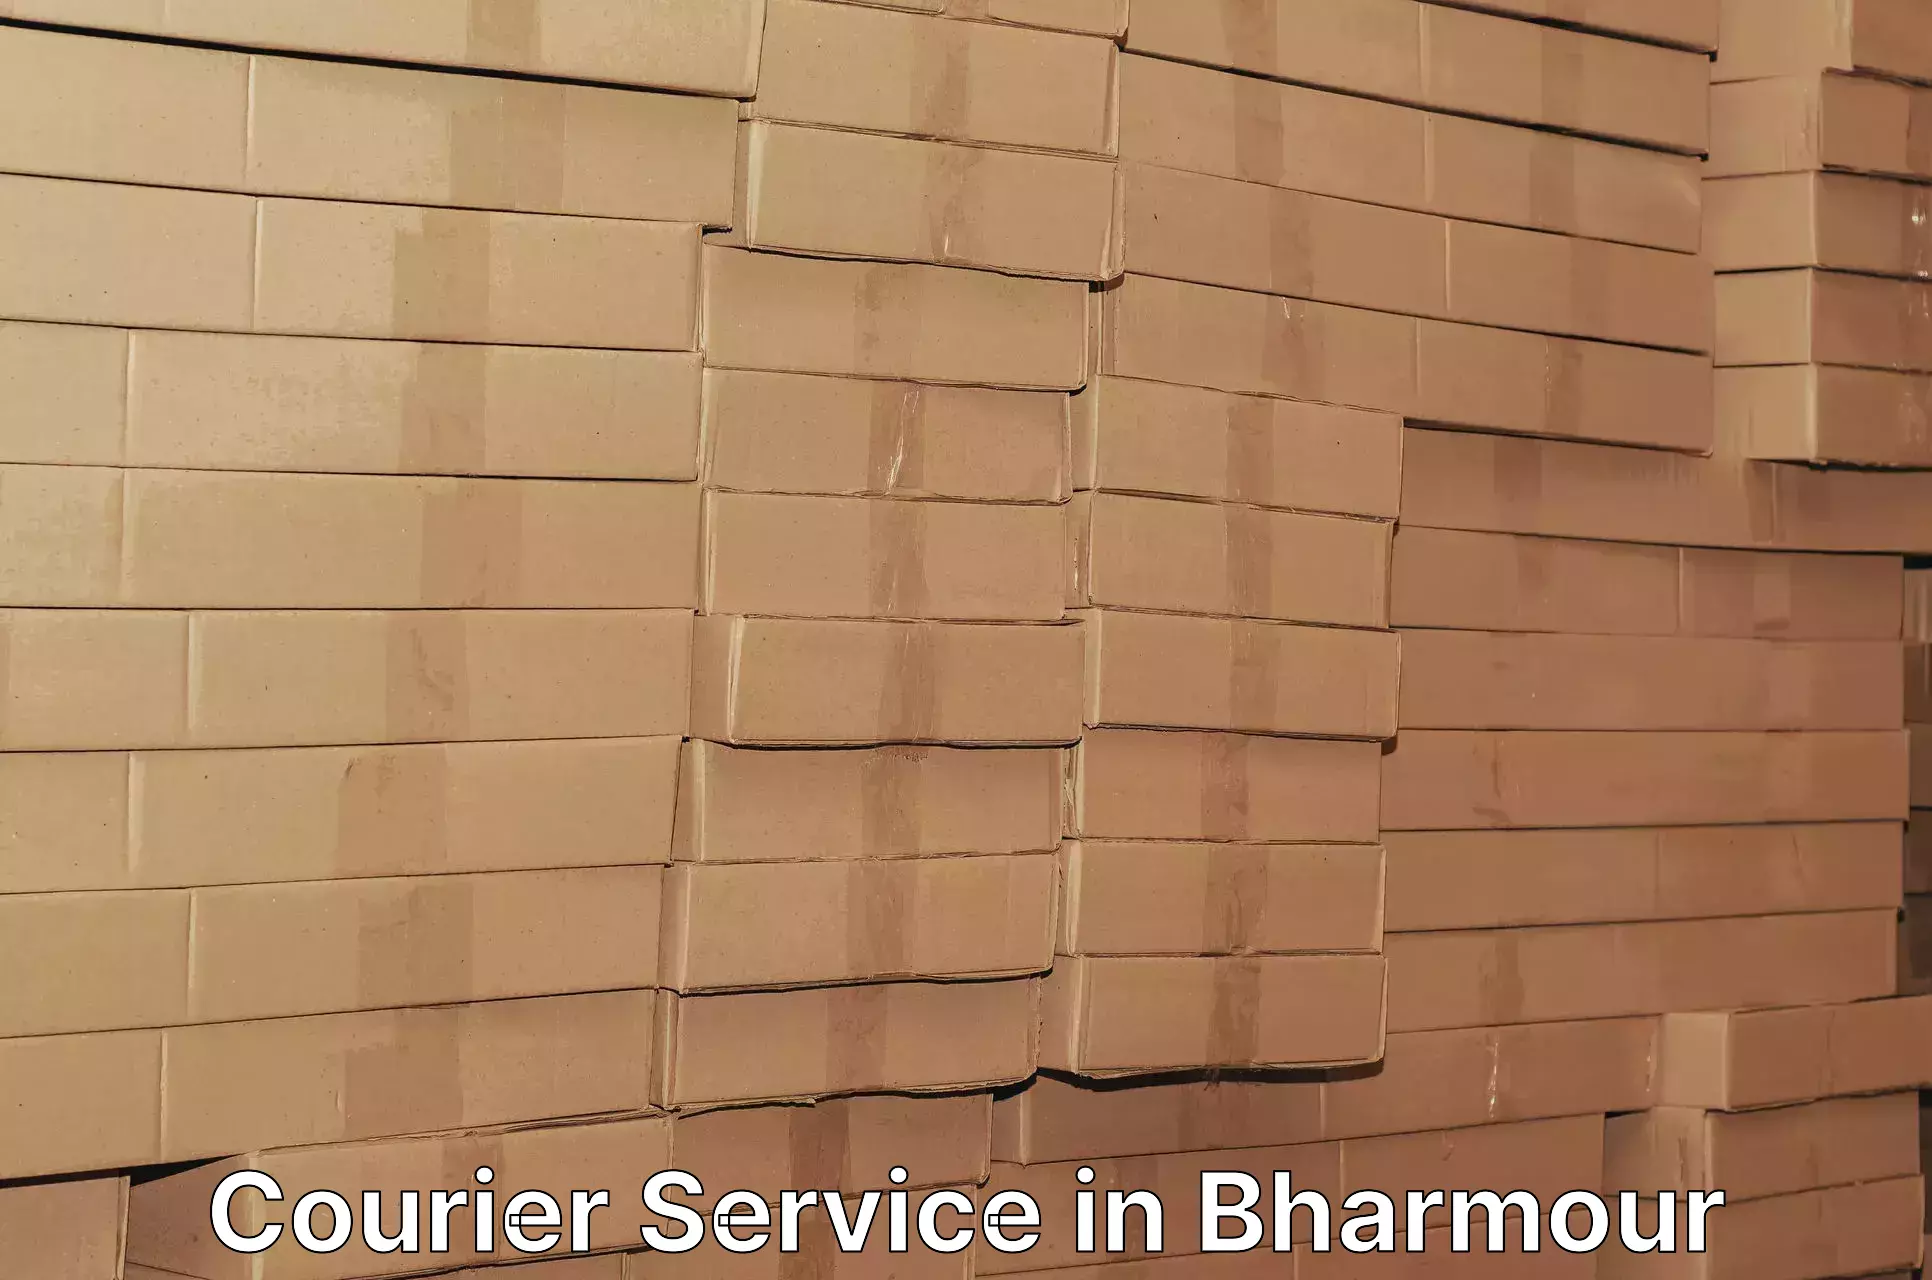 Secure package delivery in Bharmour